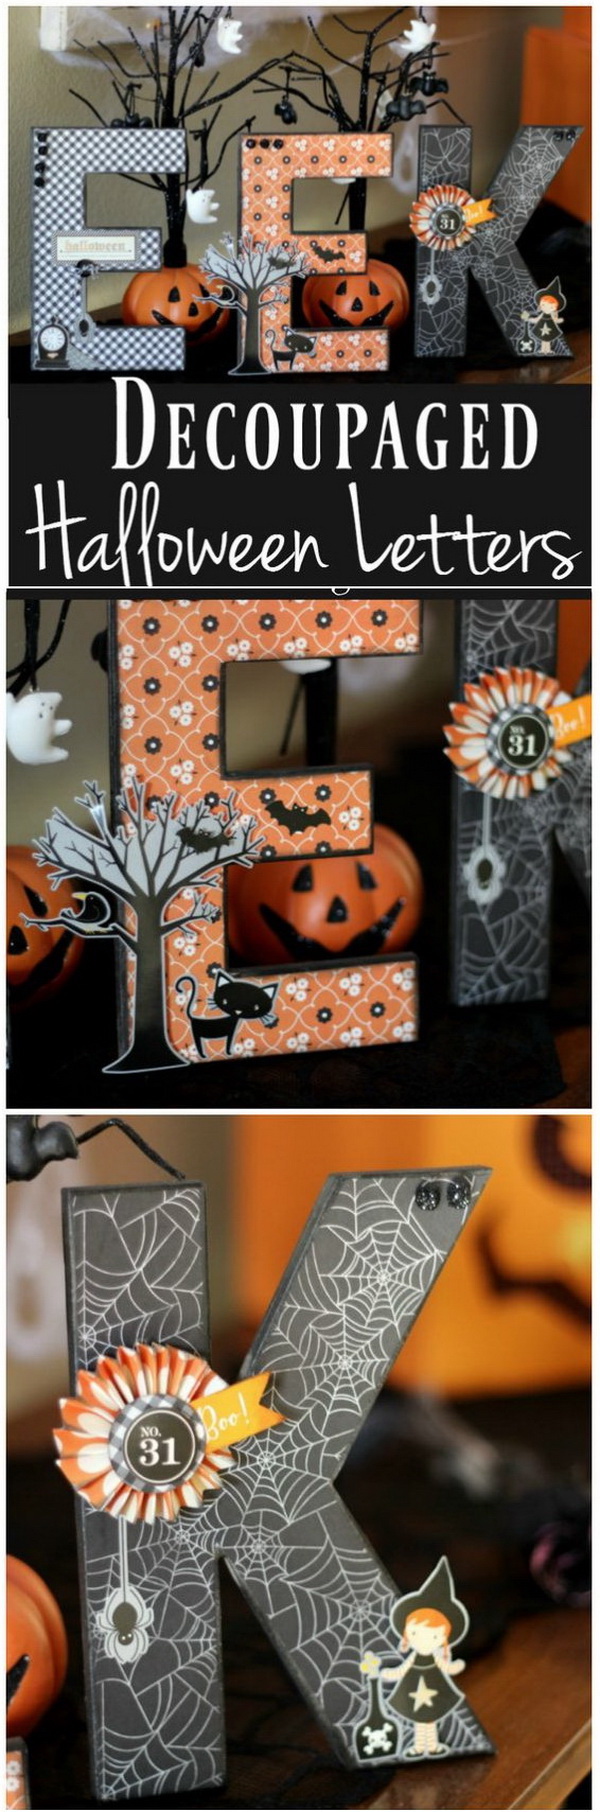 Decoupaged Halloween Letters.What a fun way to add that unique, whimsical touch to your Halloween Decor with these decoupages Halloween themed letters!  